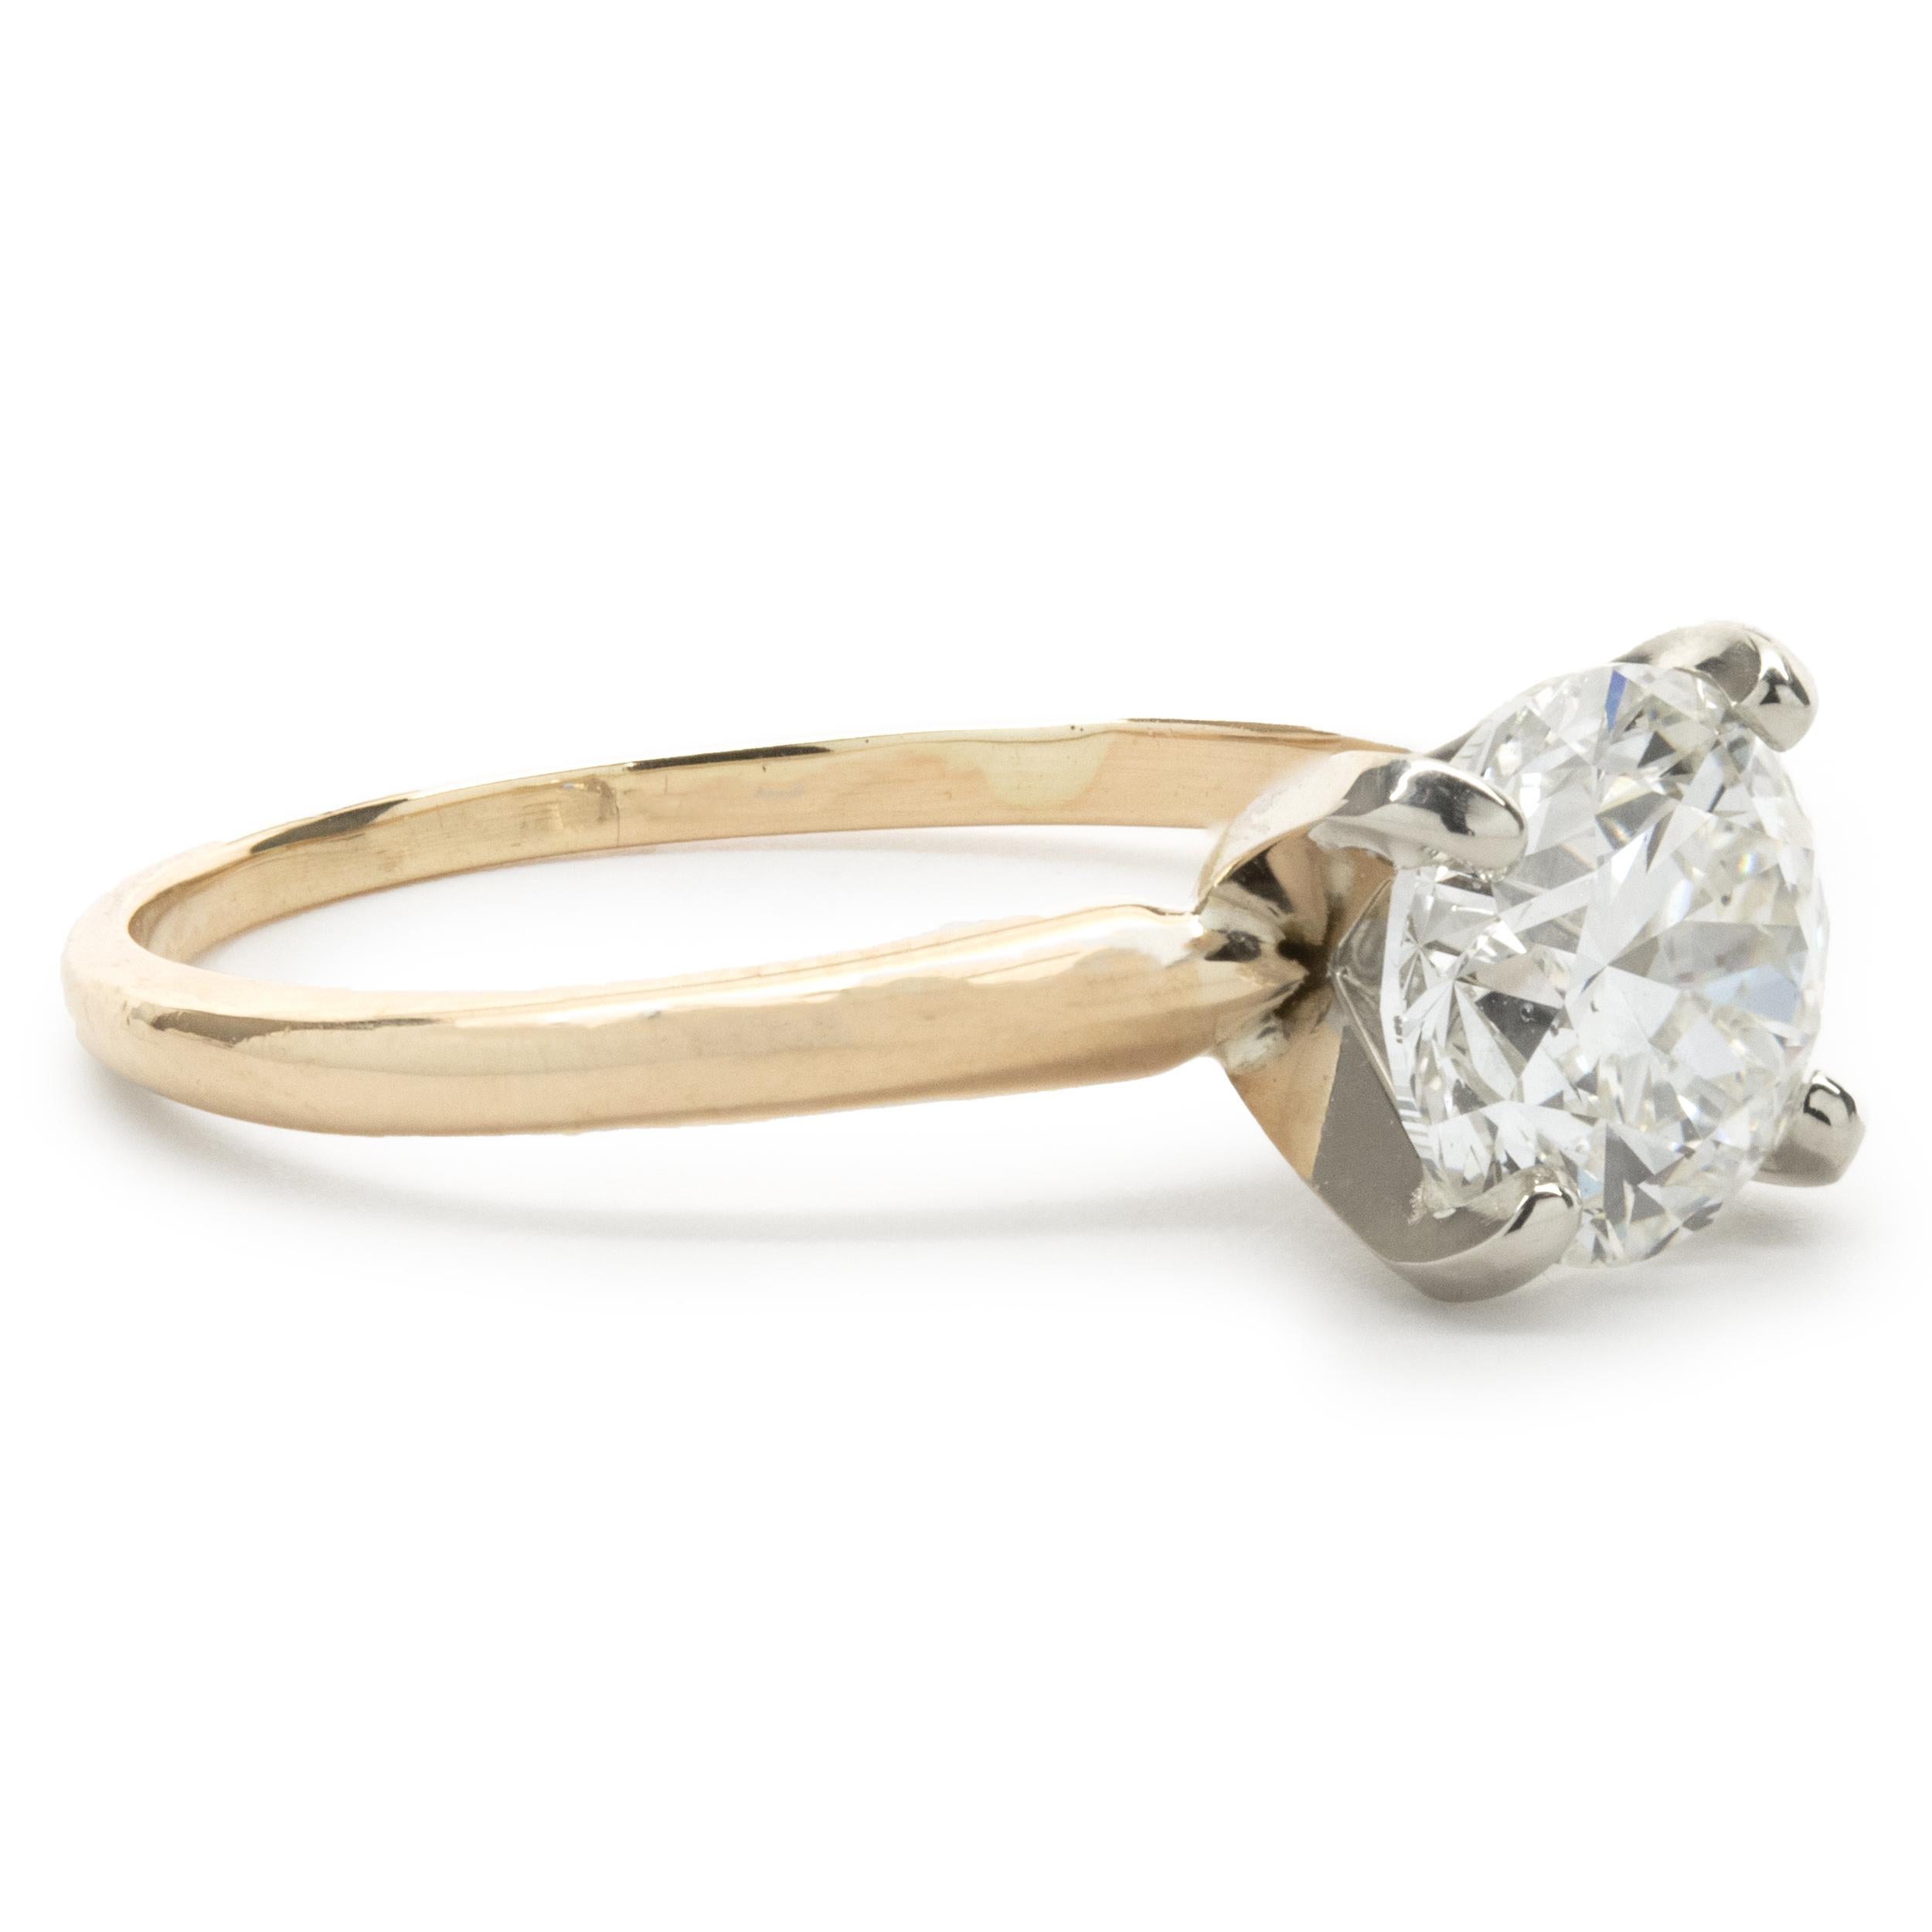 Designer: custom
Material: 14K yellow gold
Diamond: 1 round brilliant cut = 2.01ct
Color: H
Clarity: VS2
GIA: 1162611446
Ring Size: 8 (please allow up to 2 additional business days for sizing requests)
Dimensions: ring top measures 7.90mm